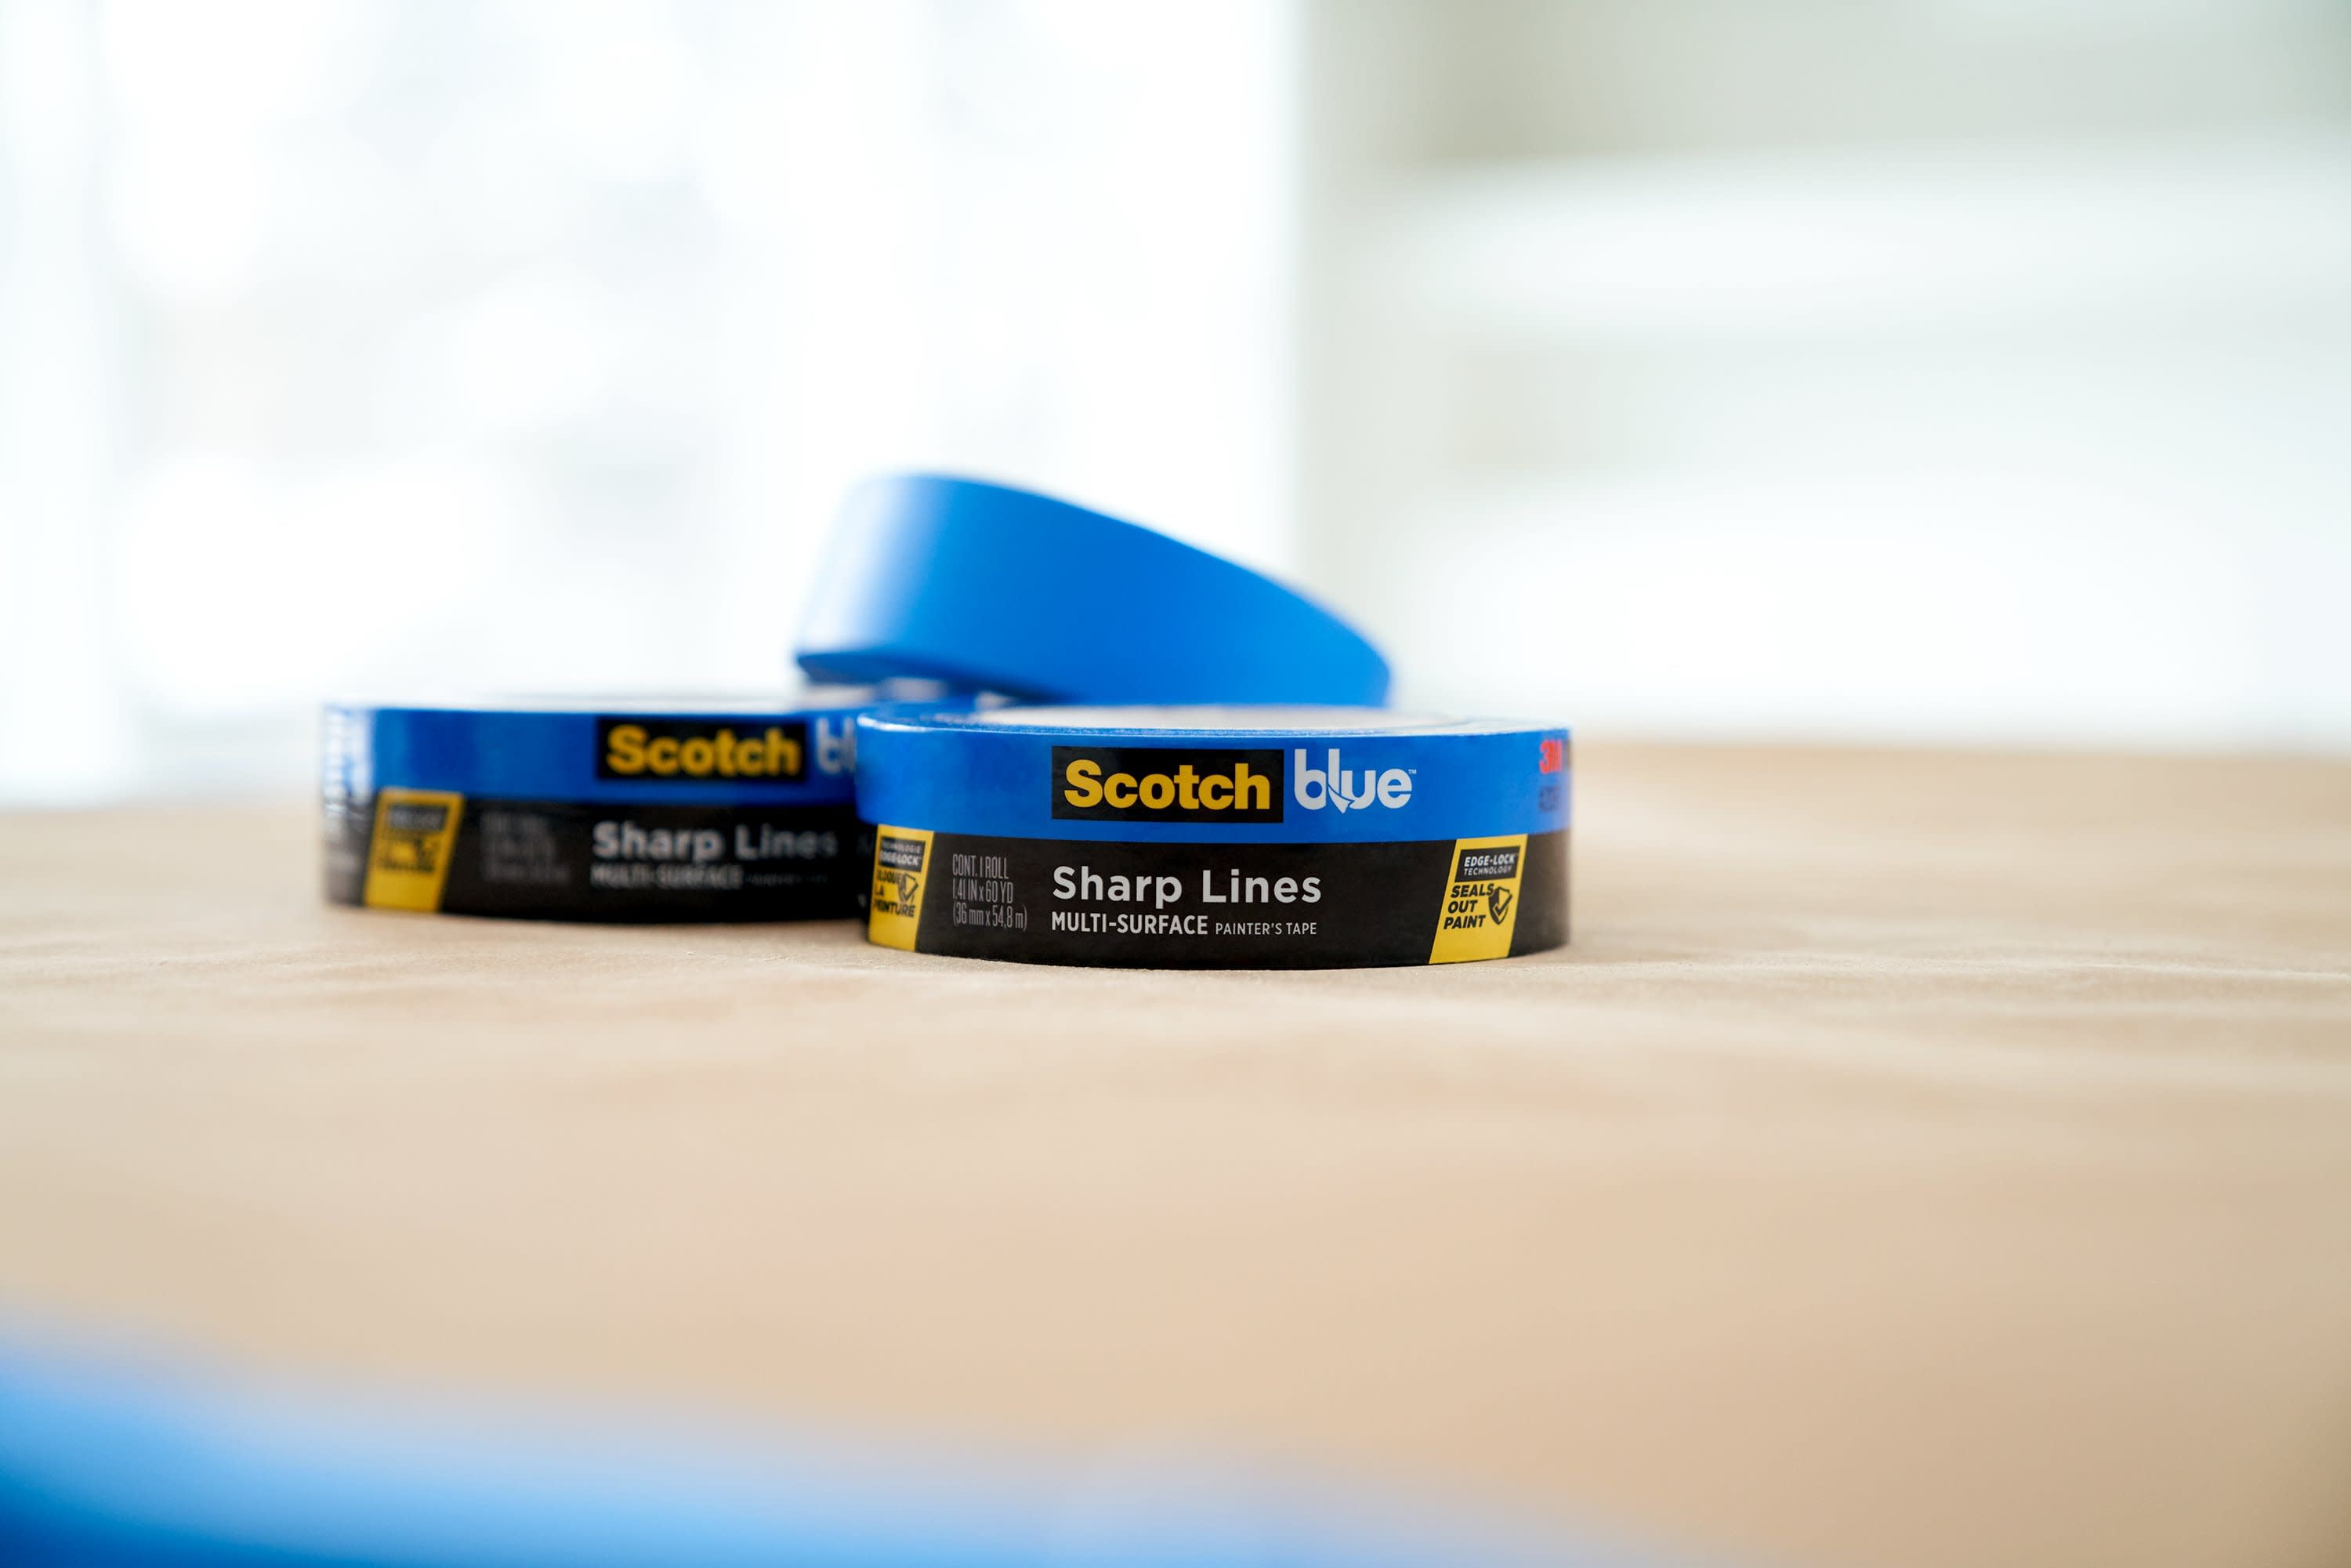 3M Scotch Blue 0.94 In. x 45 Yd. Sharp Lines Painter's Tape